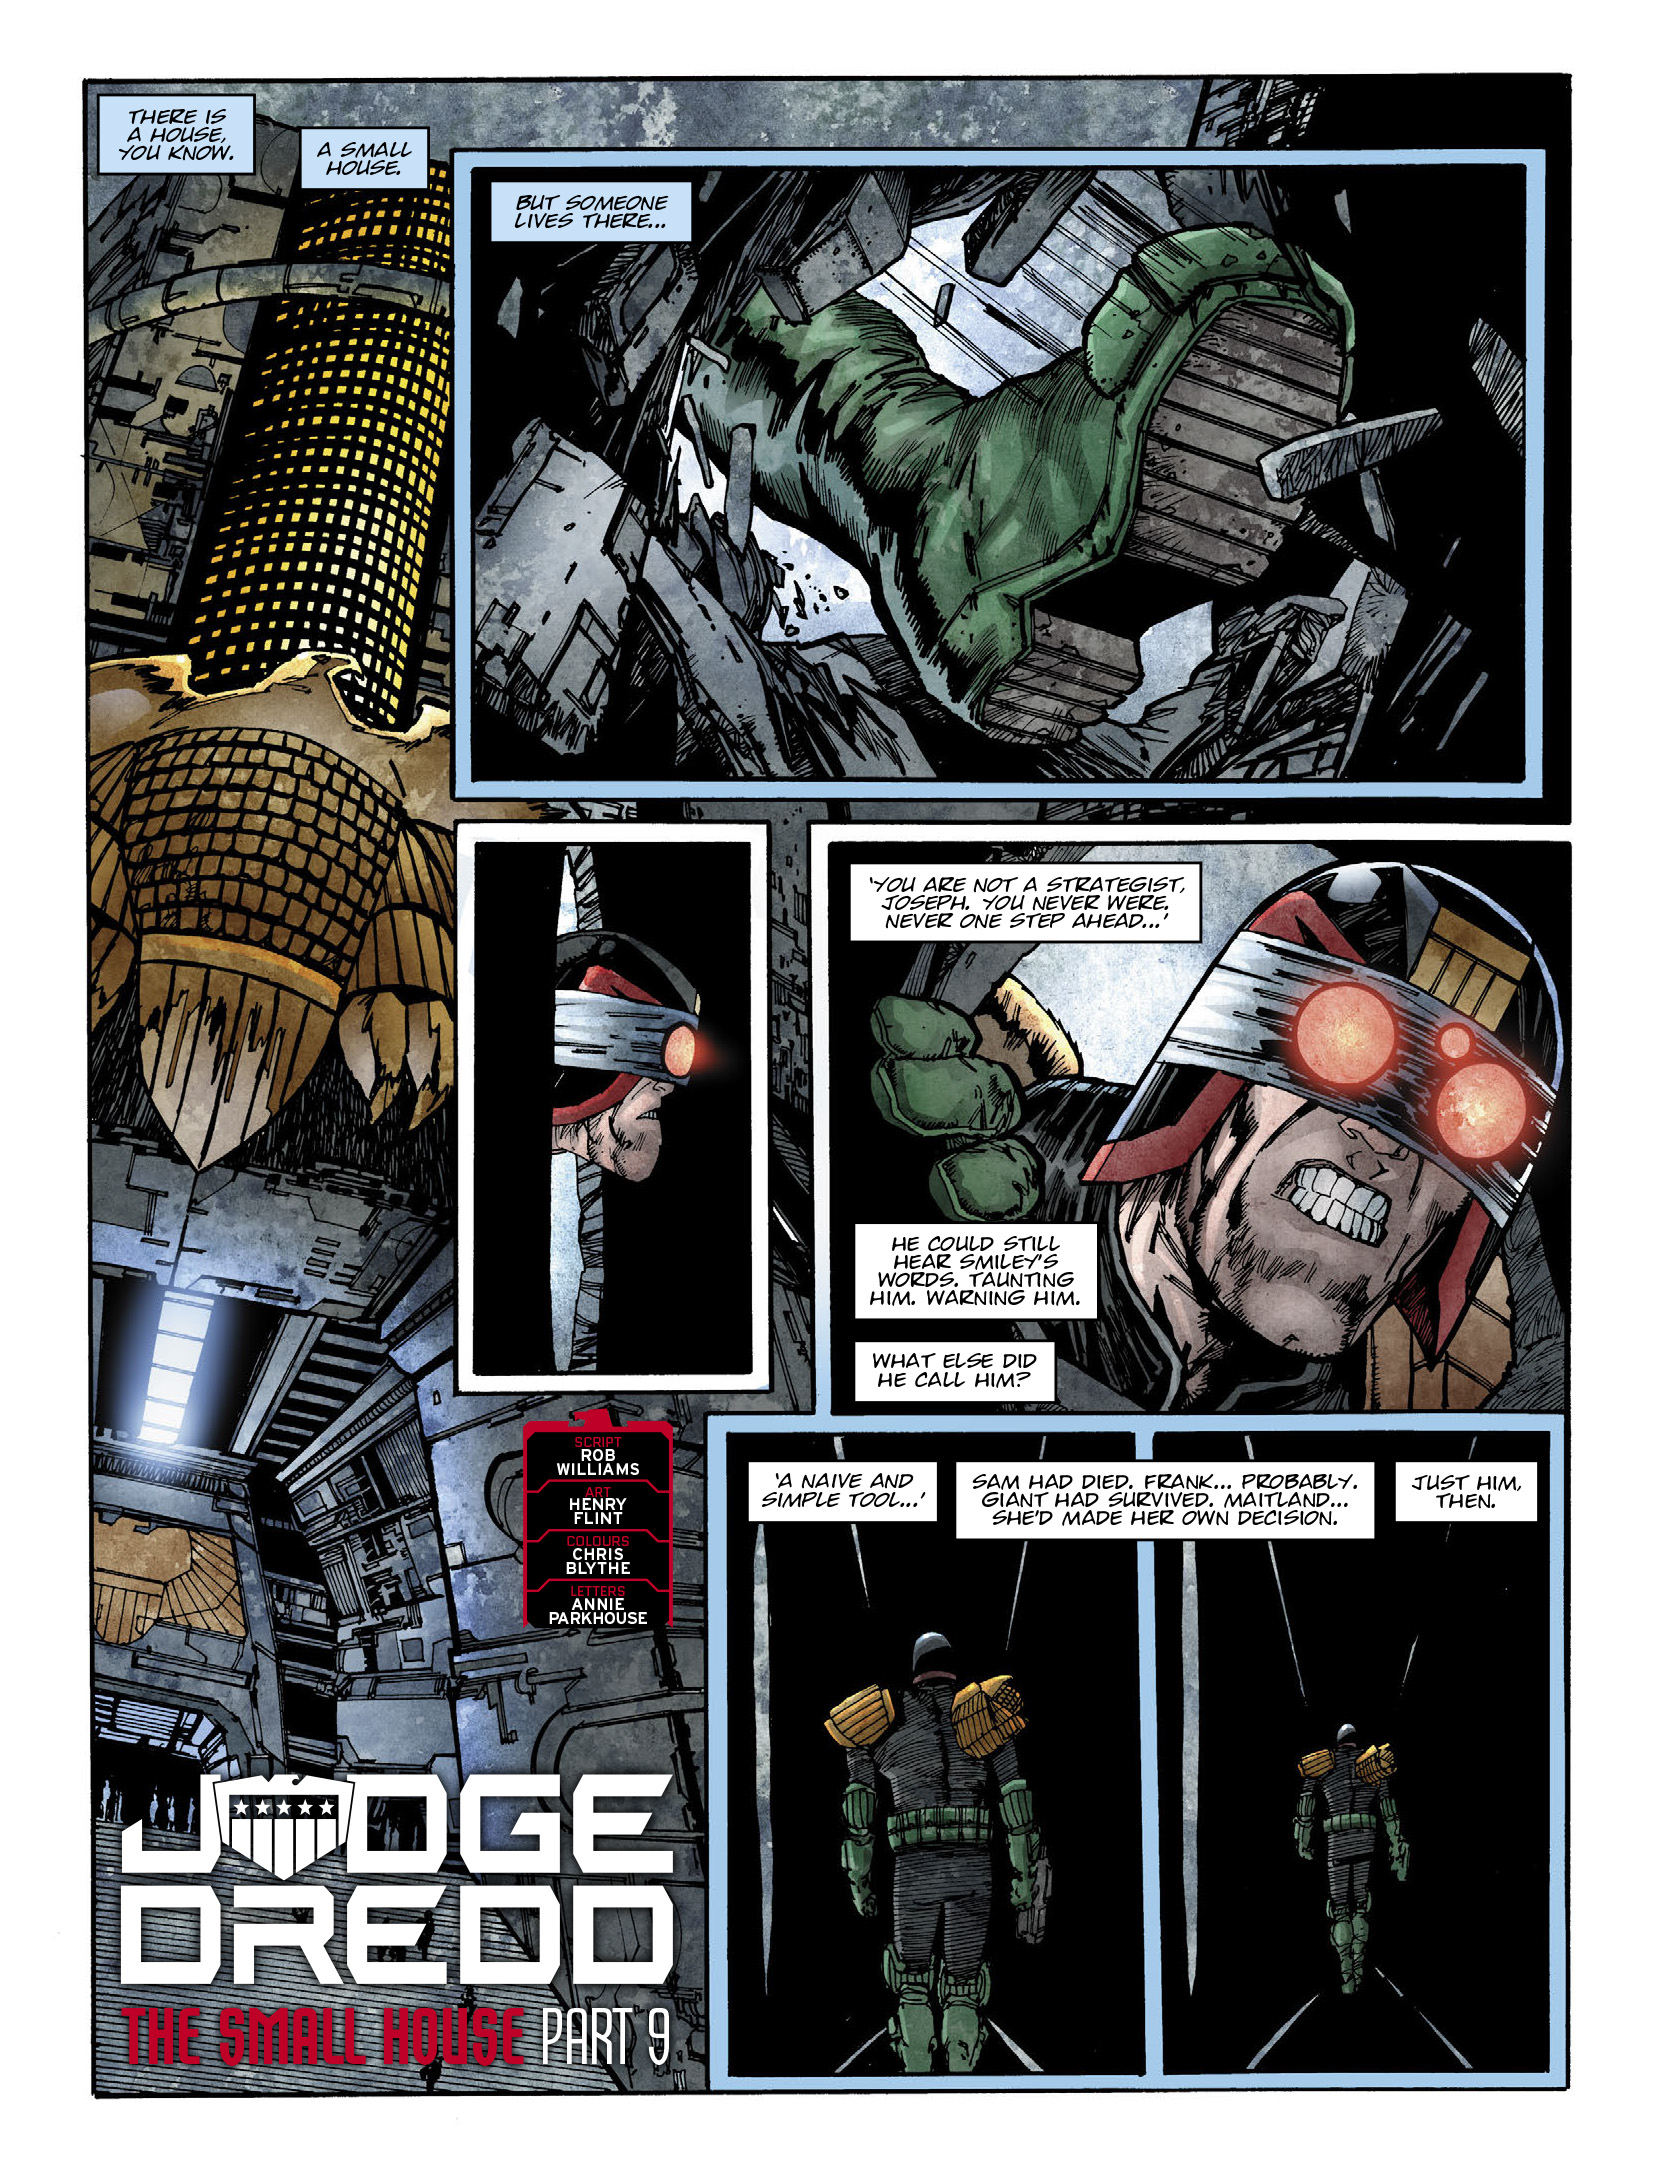 2000 AD: Chapter 2108 - Page 3